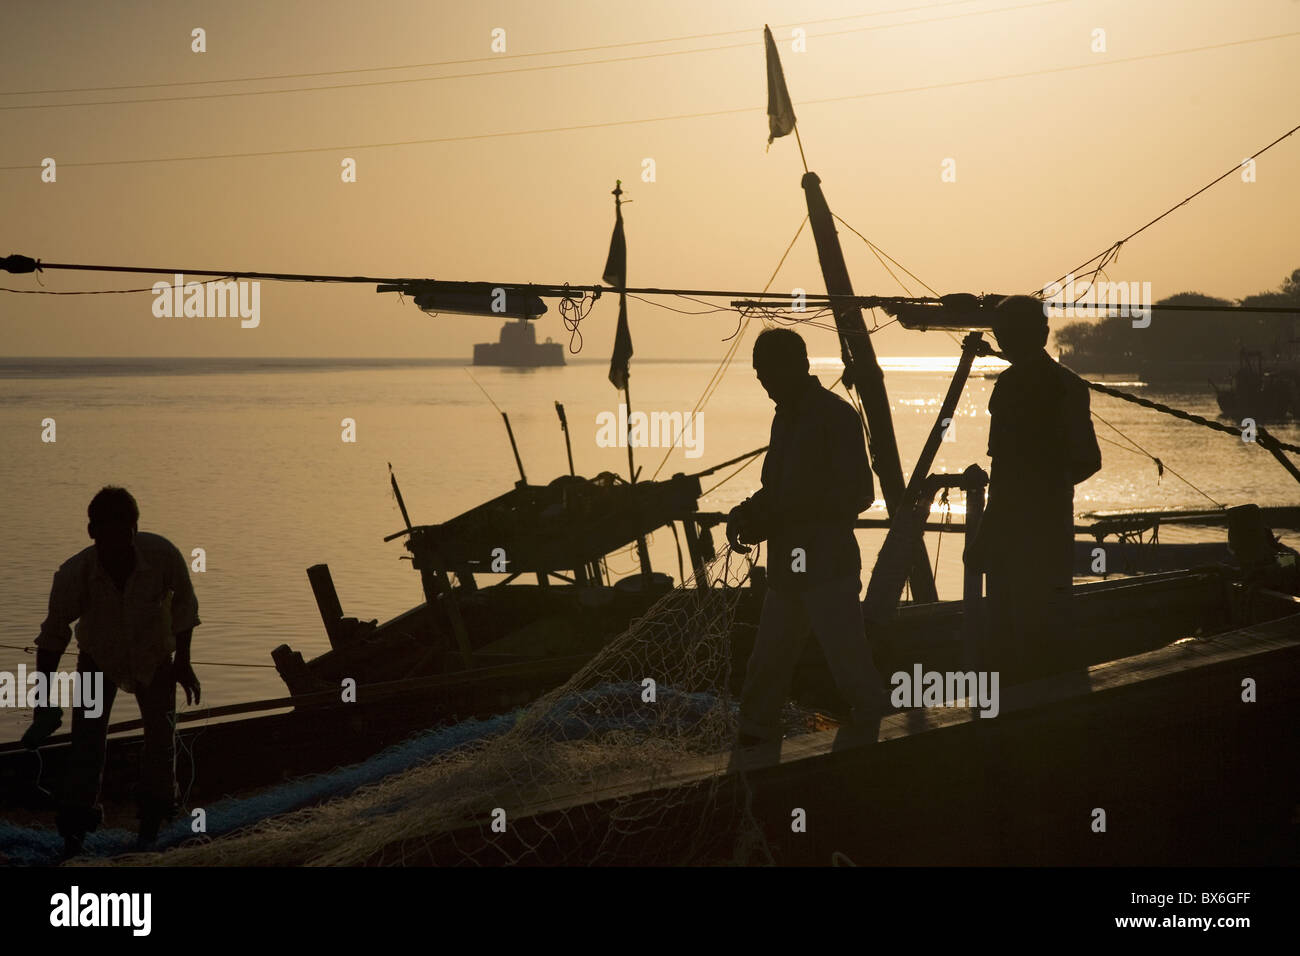 Fishermen, silhouetted in the golden light of dawn at Diu, Union Territory of Diu and Daman, India, Asia Stock Photo